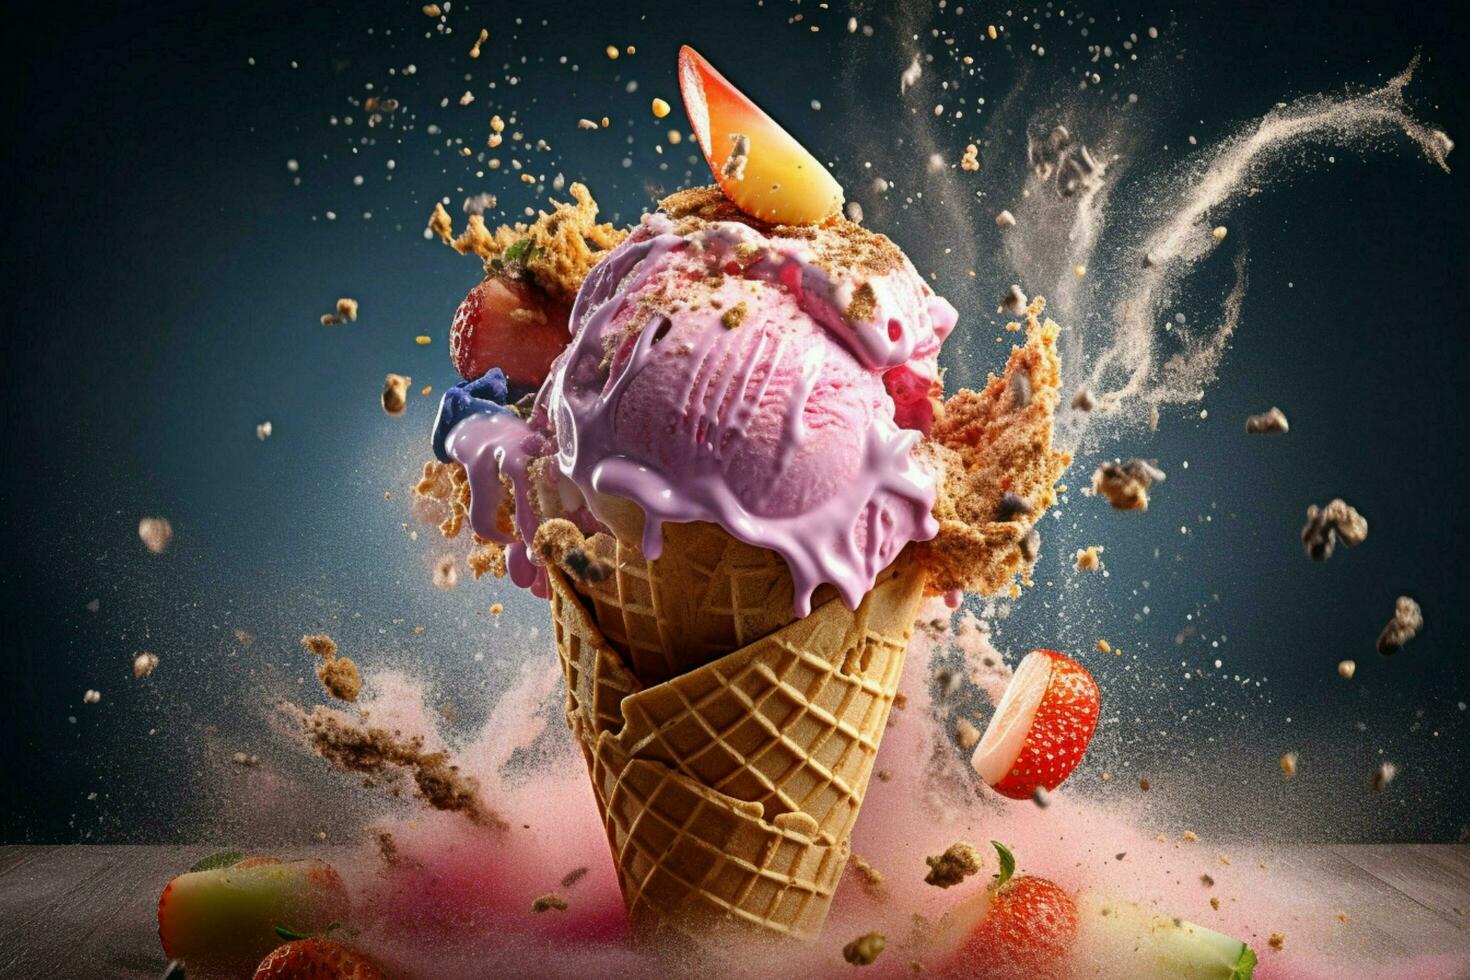 Capture the excitement and energy of ice cream with photo